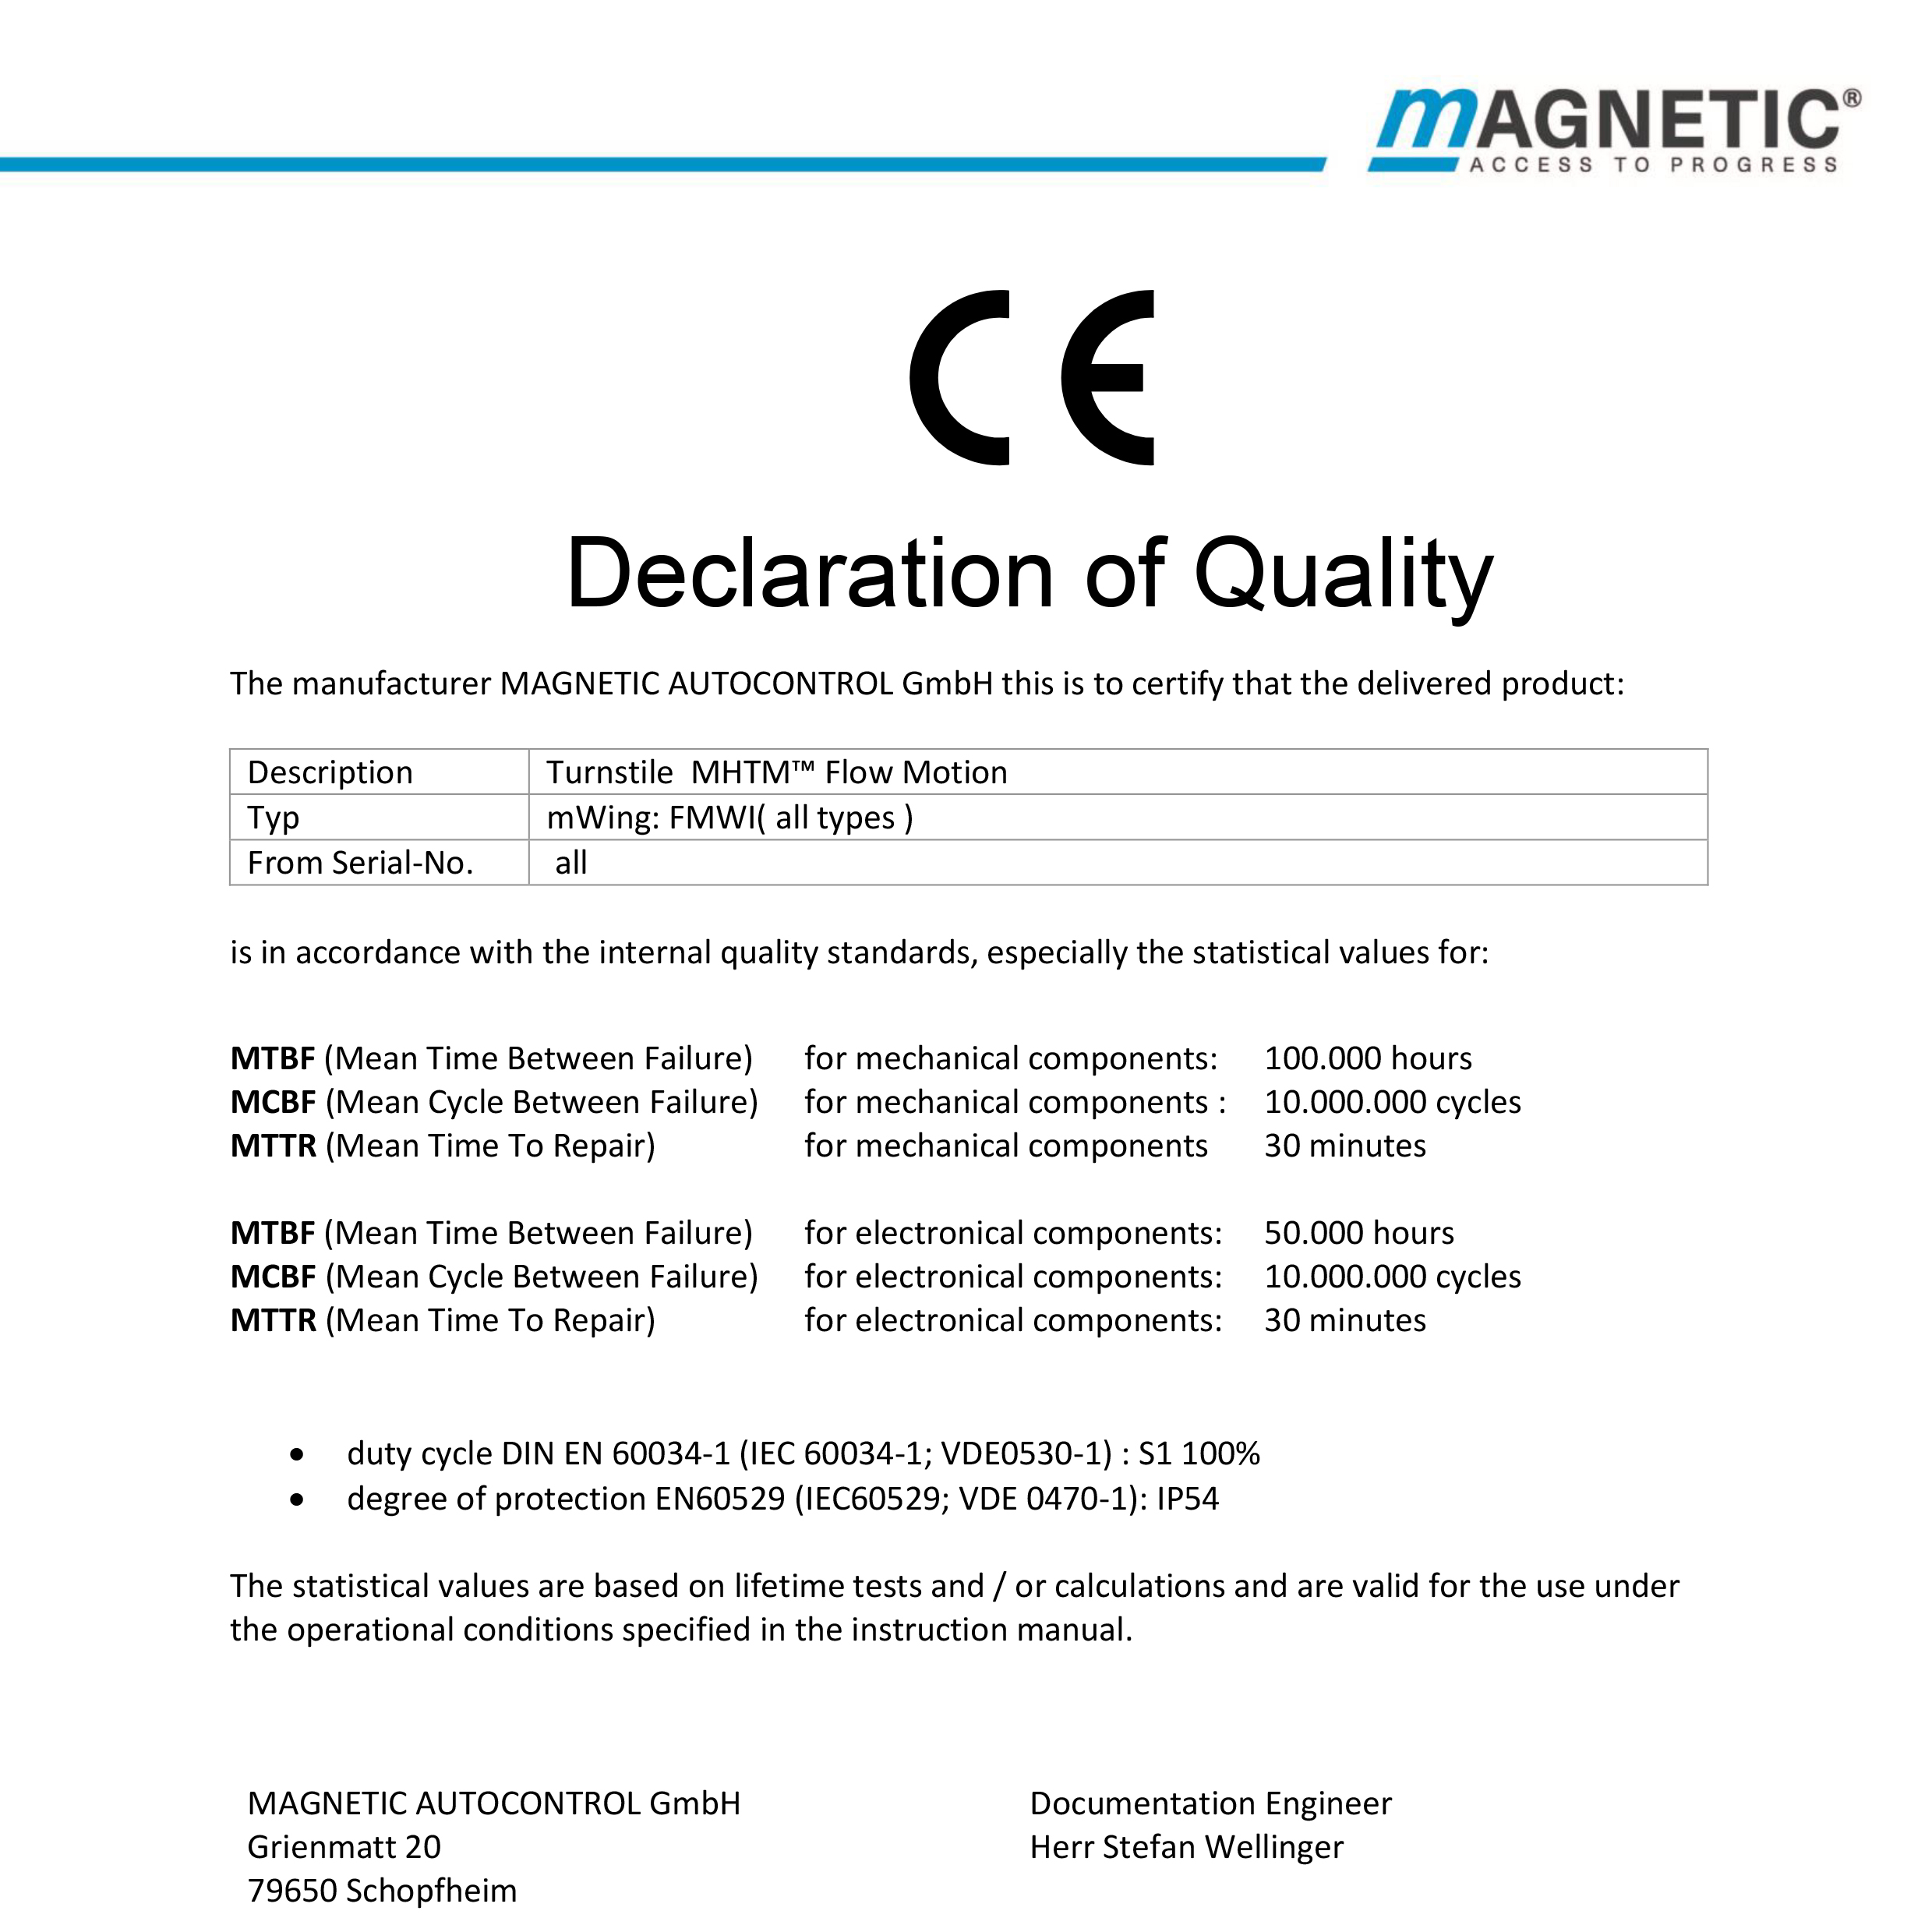 mWing Declaration of Quality